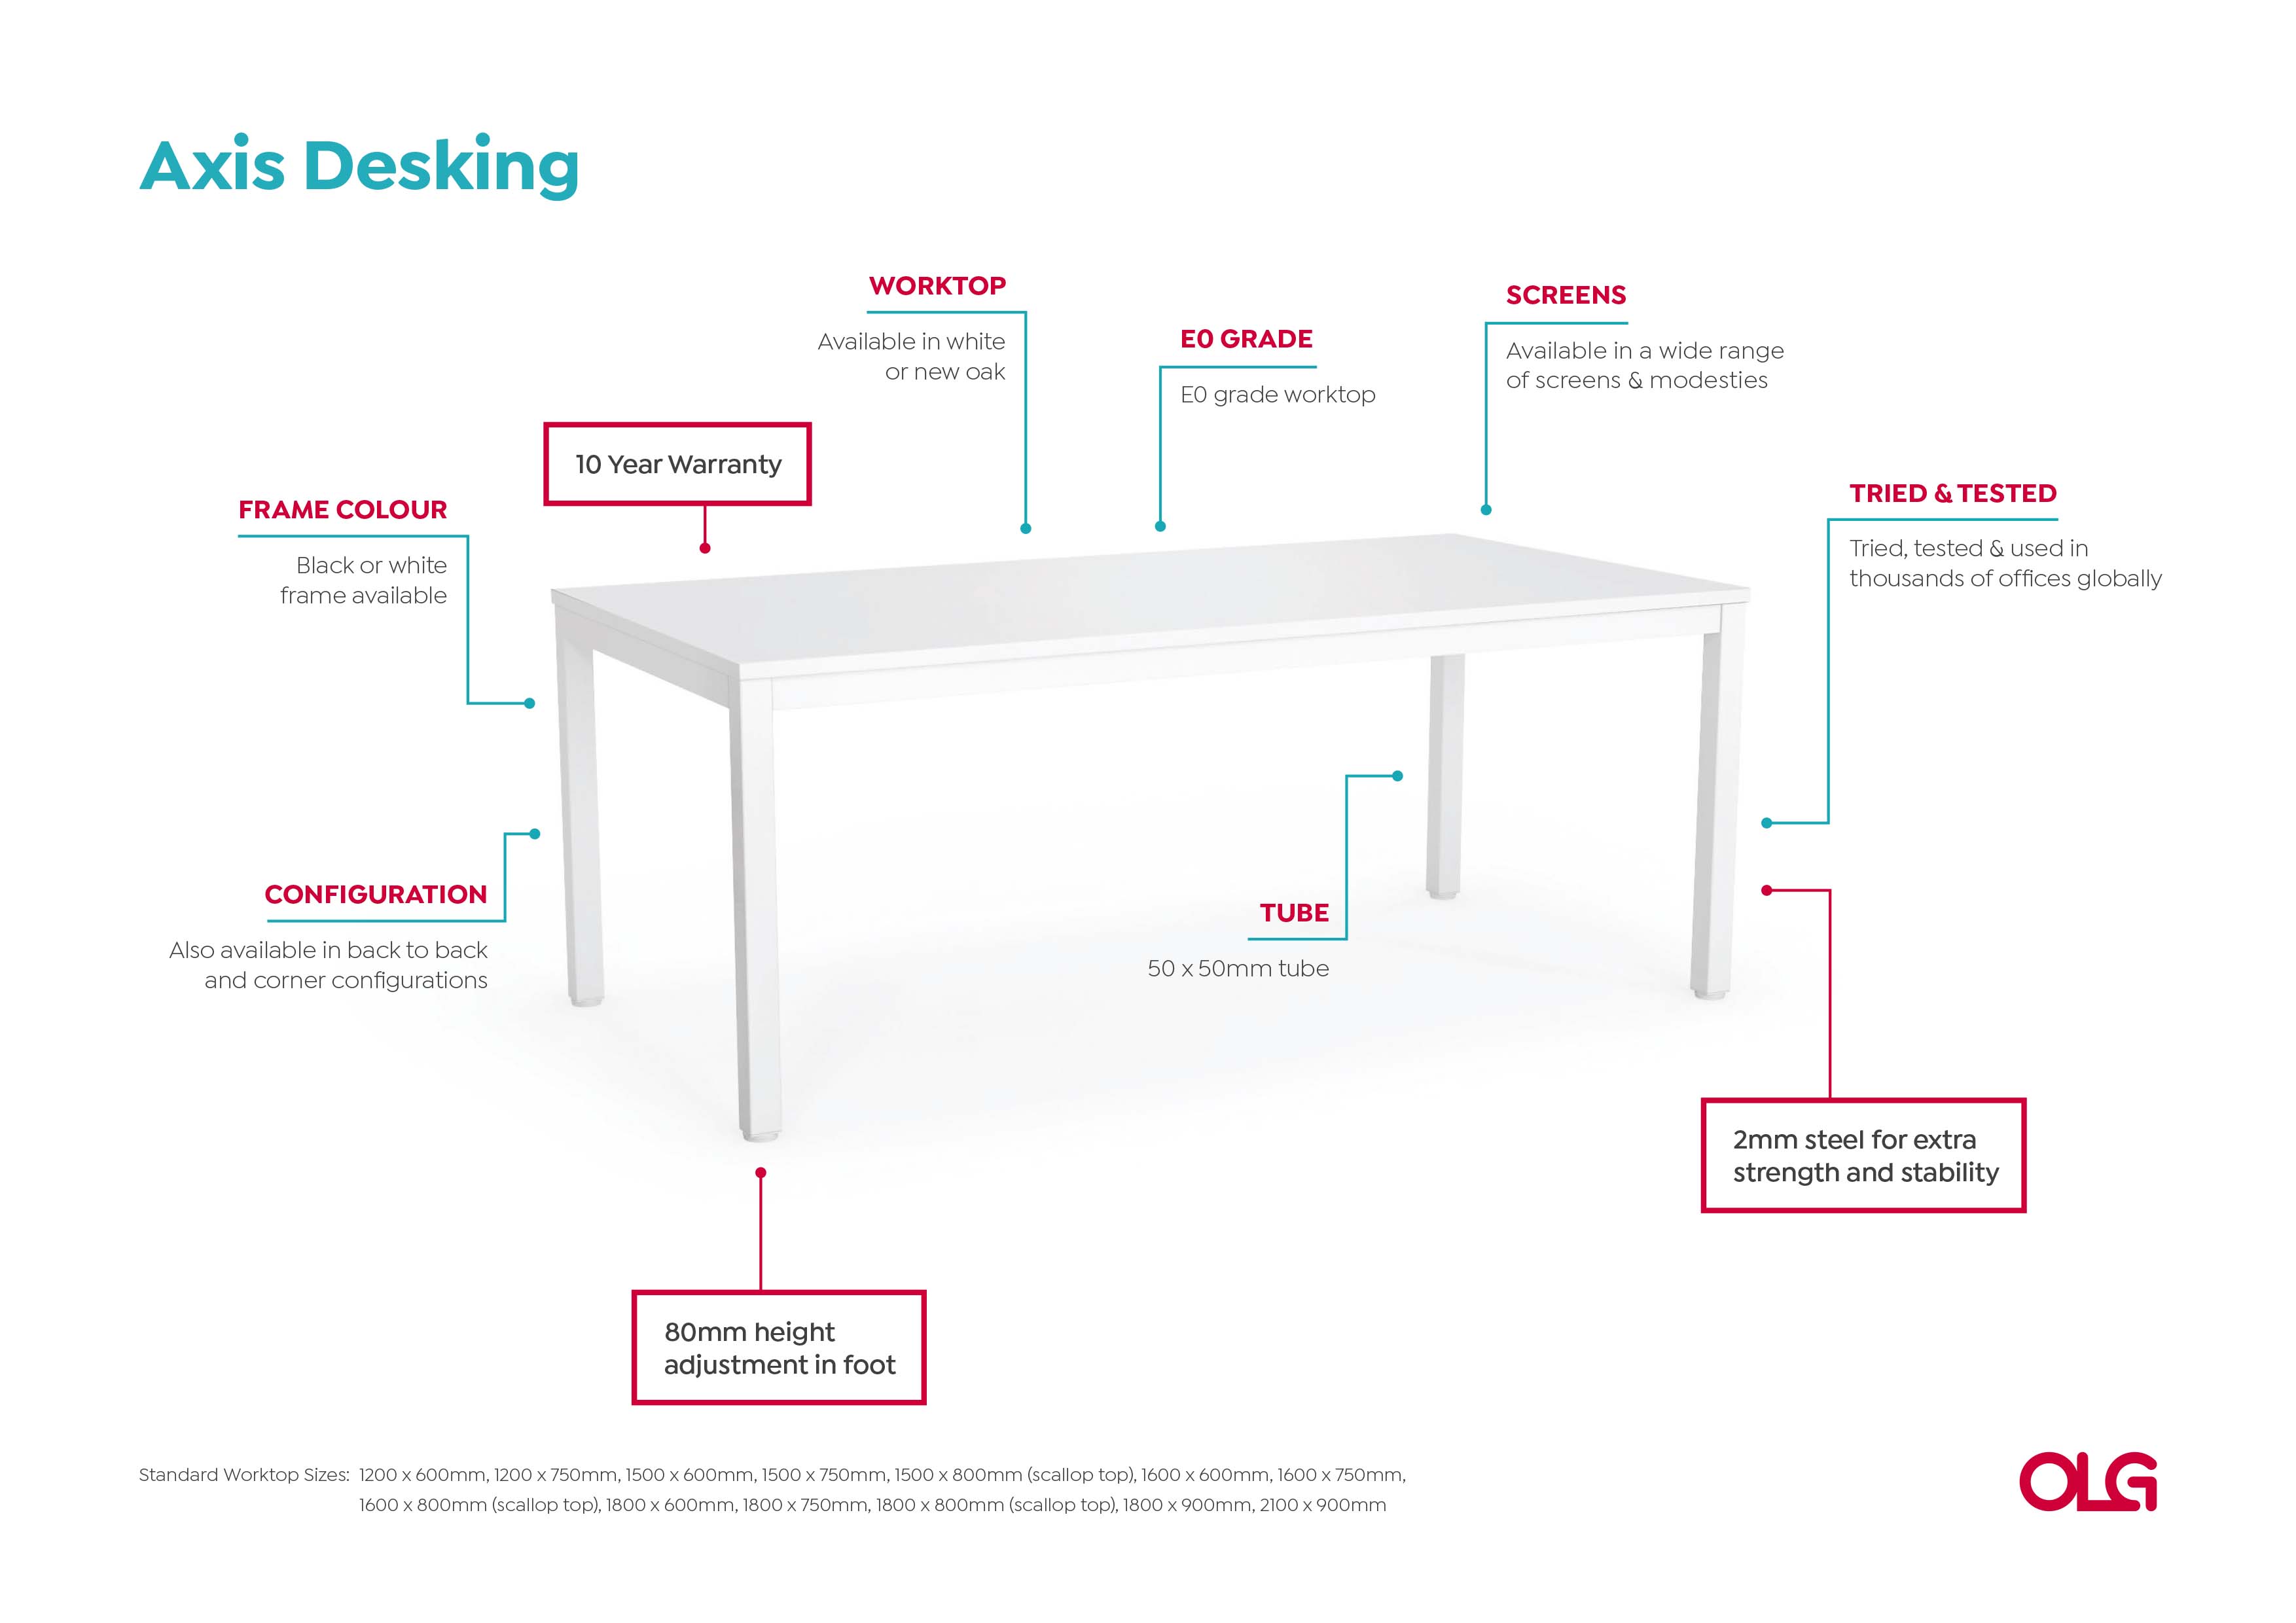 Anotated Axis Desking Image v0.1